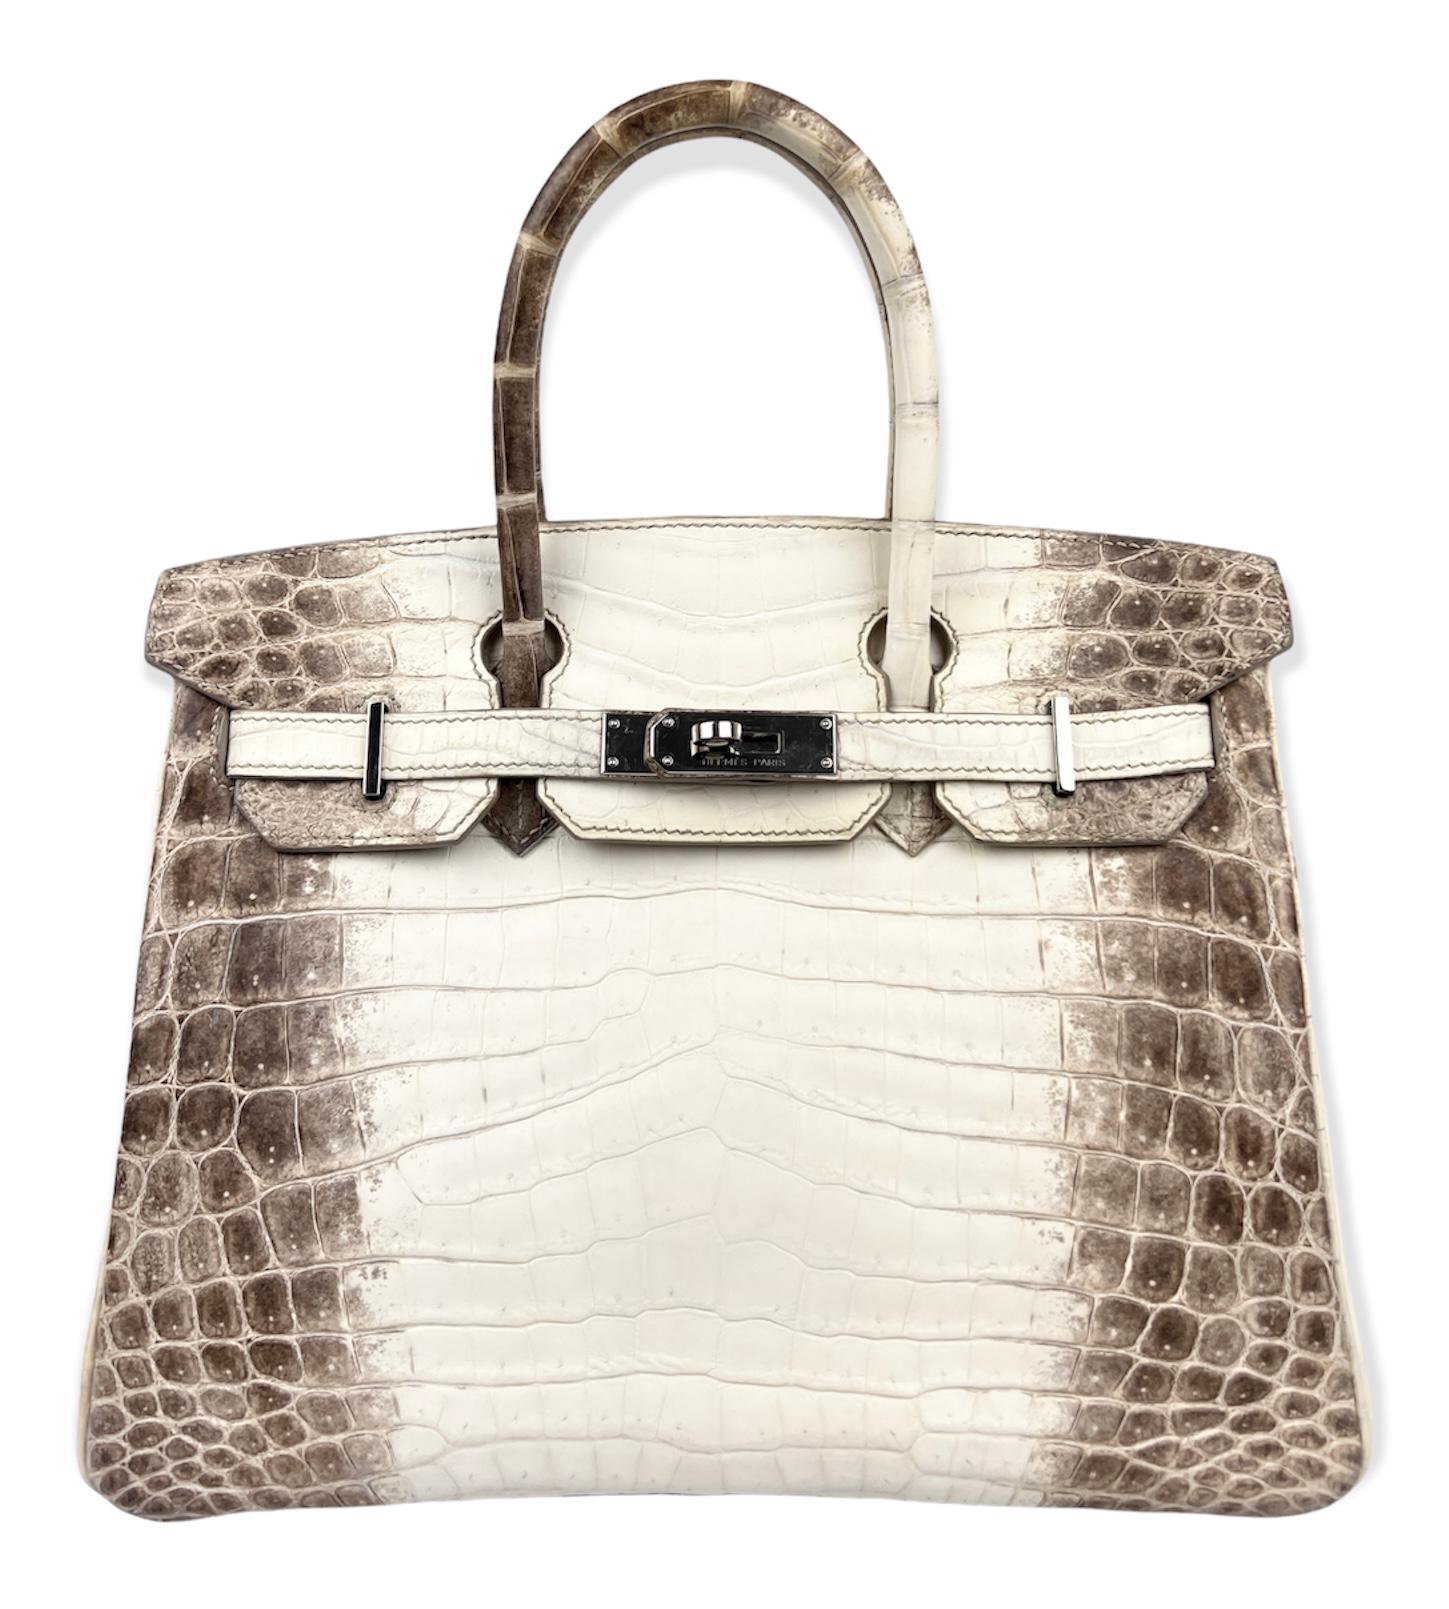 Absolutely Stunning Holy Grail and Rarest Handbag in the World! Hermes Birkin 30 Bag Matte White Himalaya Niloticus Crocodile Palladium Hardware. Excellent a condition with Plastic on Hardware. Includes Cites.


Shop with Confidence from Lux